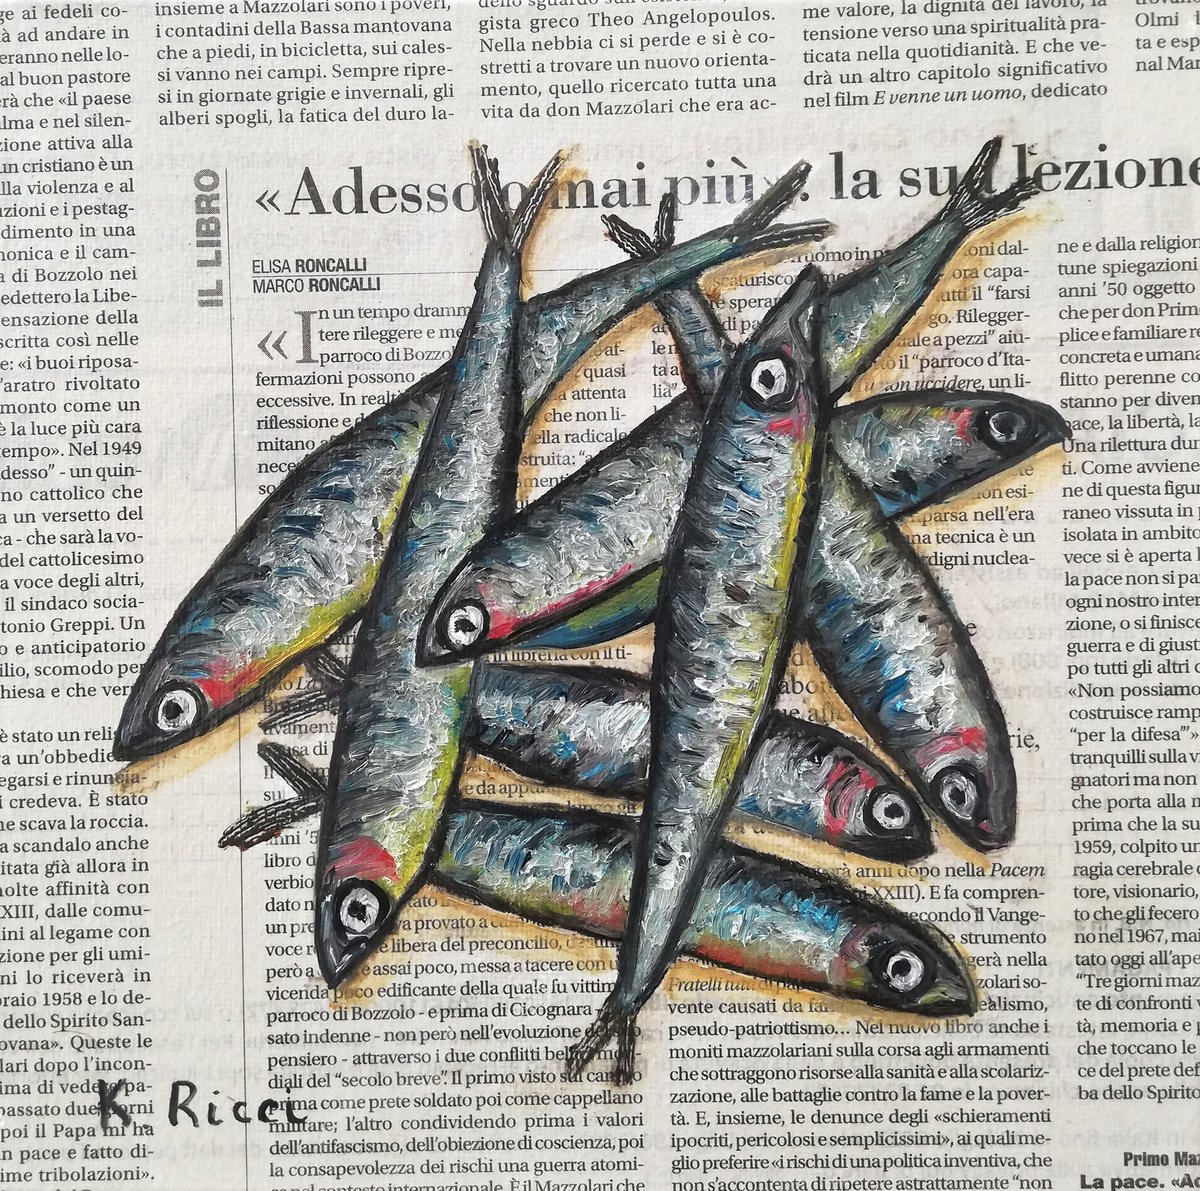 Mixed Anchovies on Newspaper Original Oil on Canvas Board Painting 8 by 8 inches (20x20... by Katia Ricci